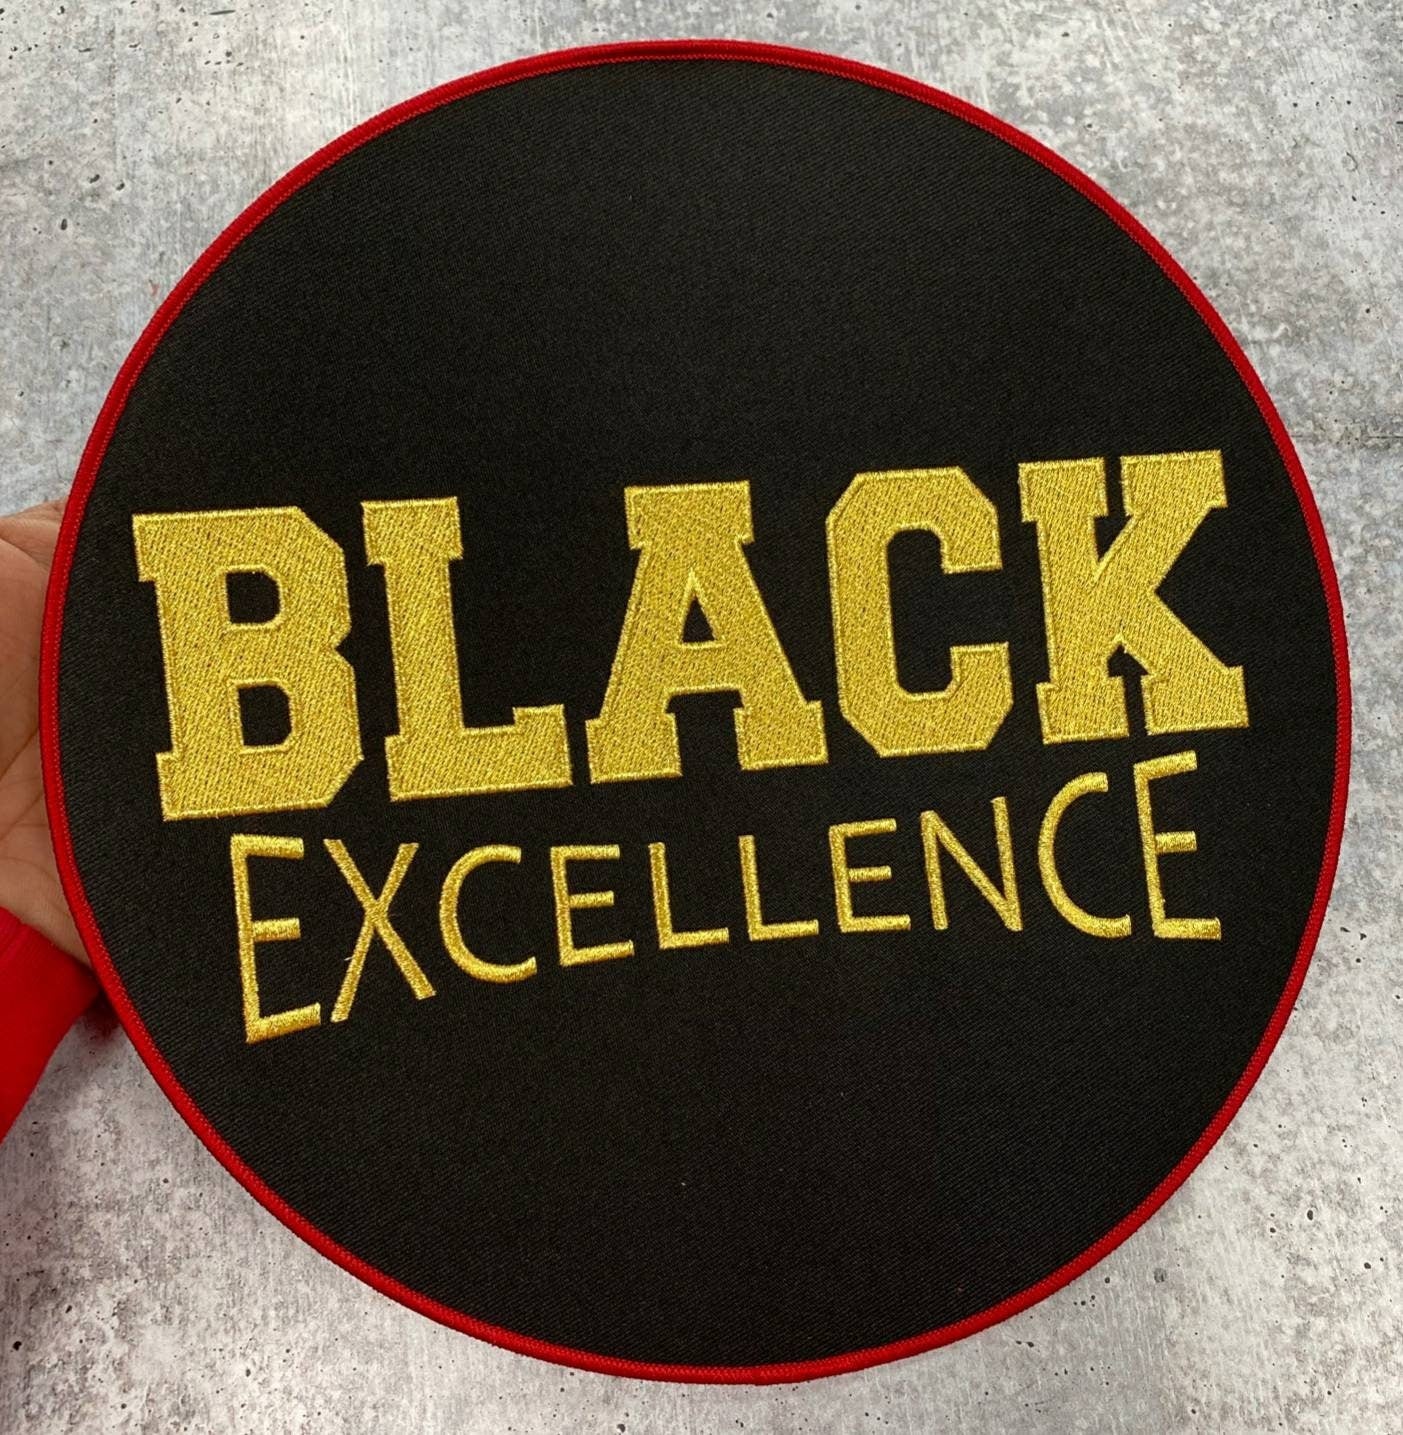 Exclusive, "Black Excellence," LARGE Patch for Jackets or Hoodies, Size 10", Metallic Gold Wording, Red Border, Black History Month Patch